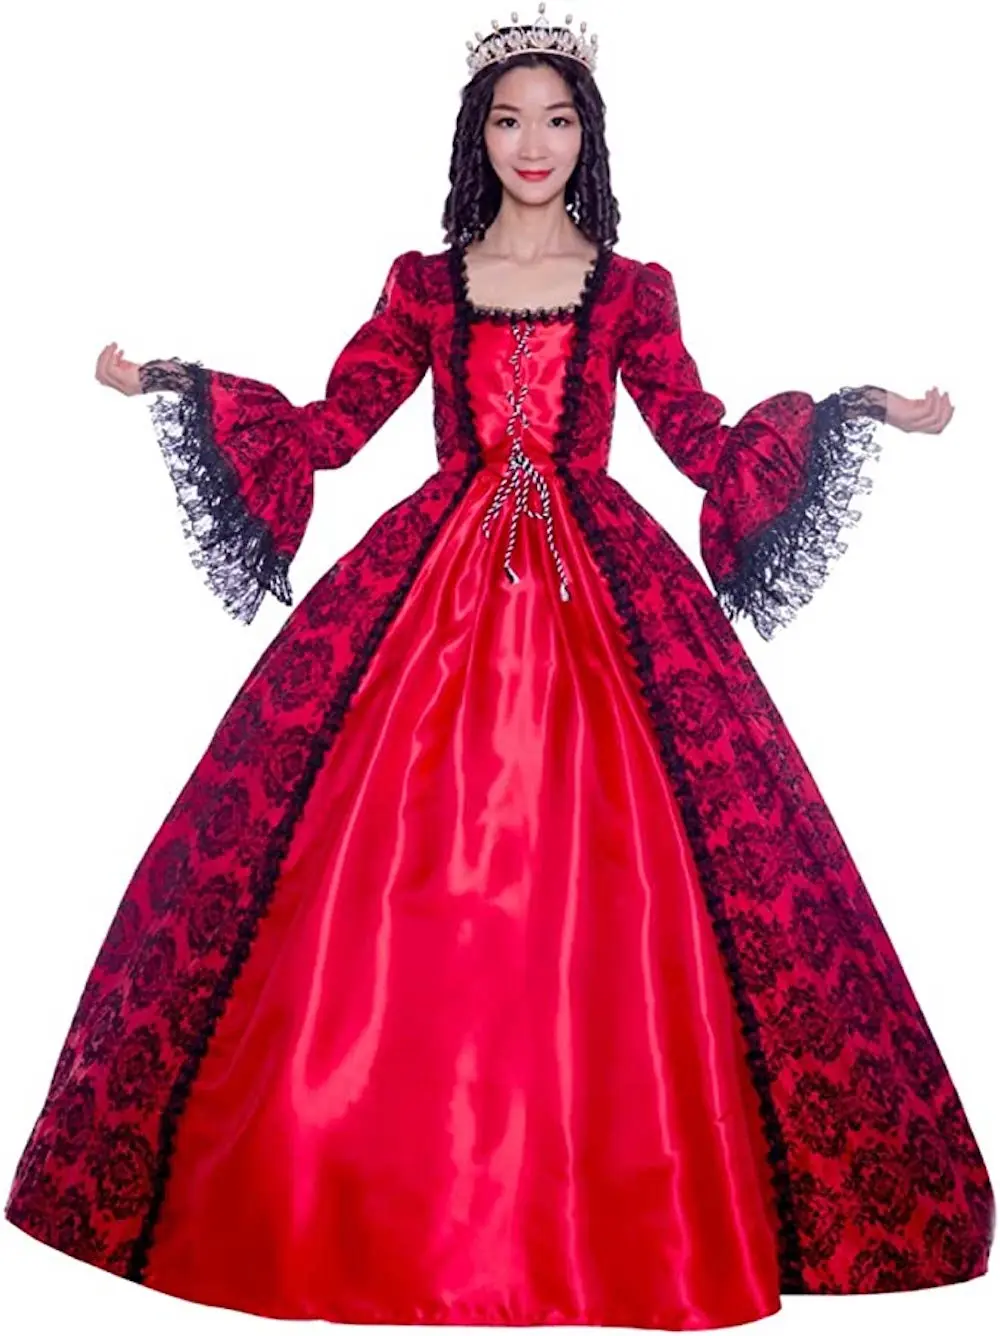 KEMAO 18th Century Renaissance Historical  Period  Evening Dresses High-end Court Rococo Baroque  Marie  Antoinette Ball Gown